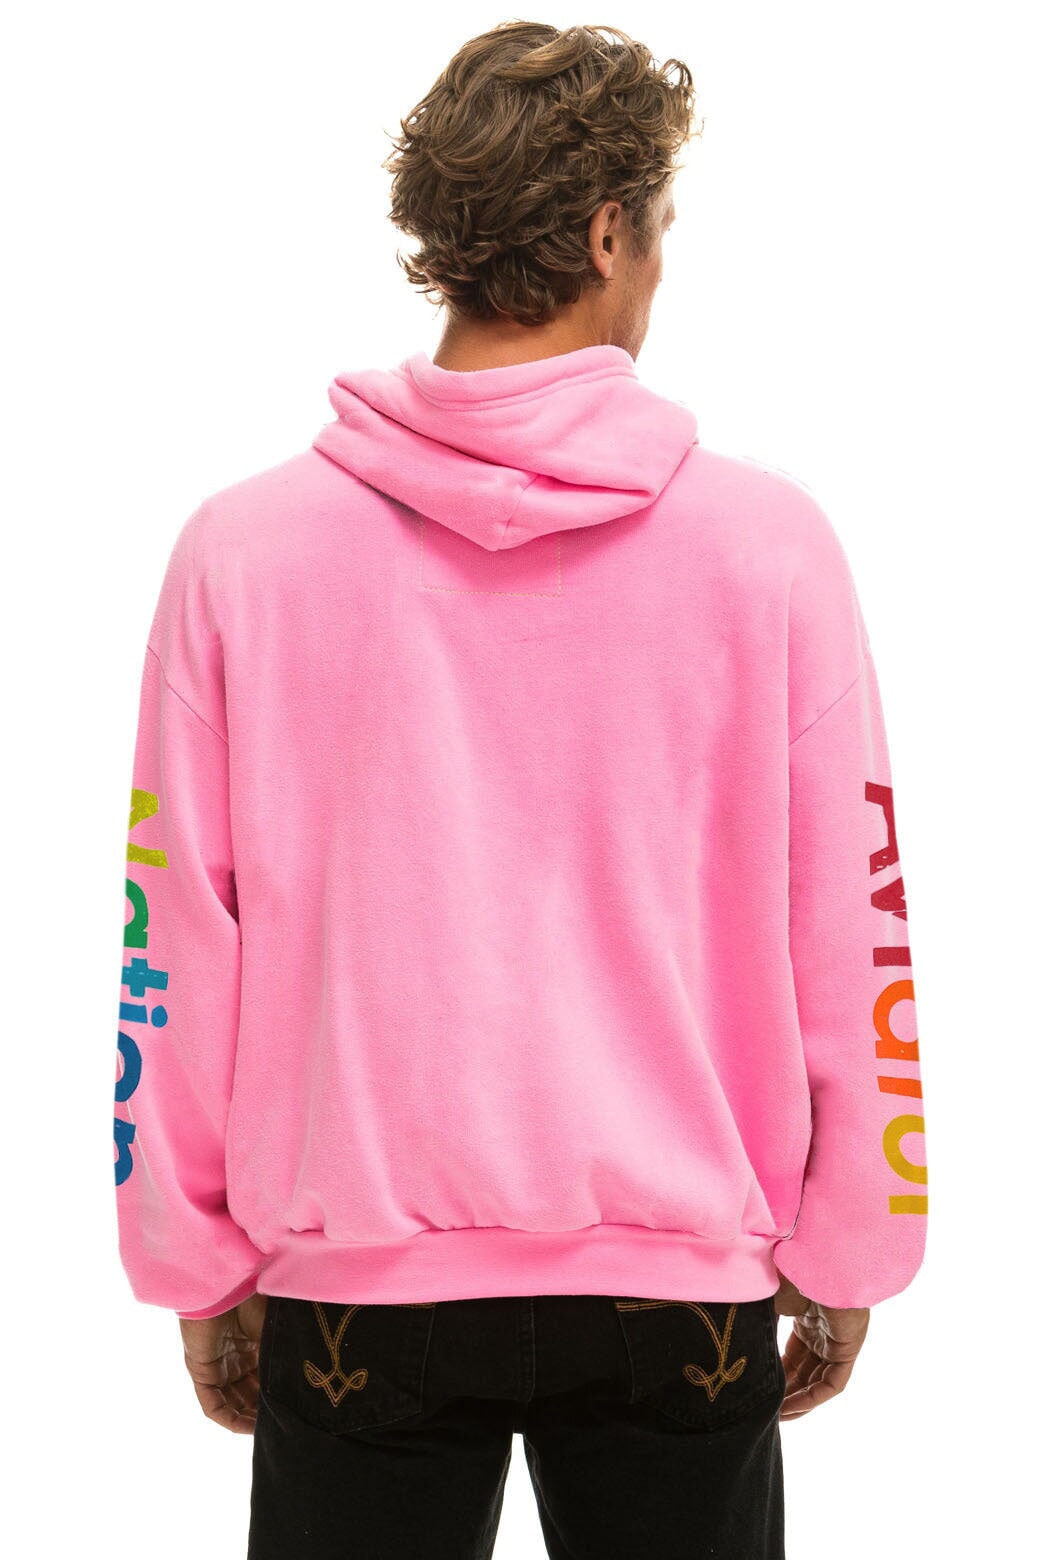 AVIATOR NATION NORTH SHORE RELAXED PULLOVER HOODIE - NEON PINK Hoodie Aviator Nation 